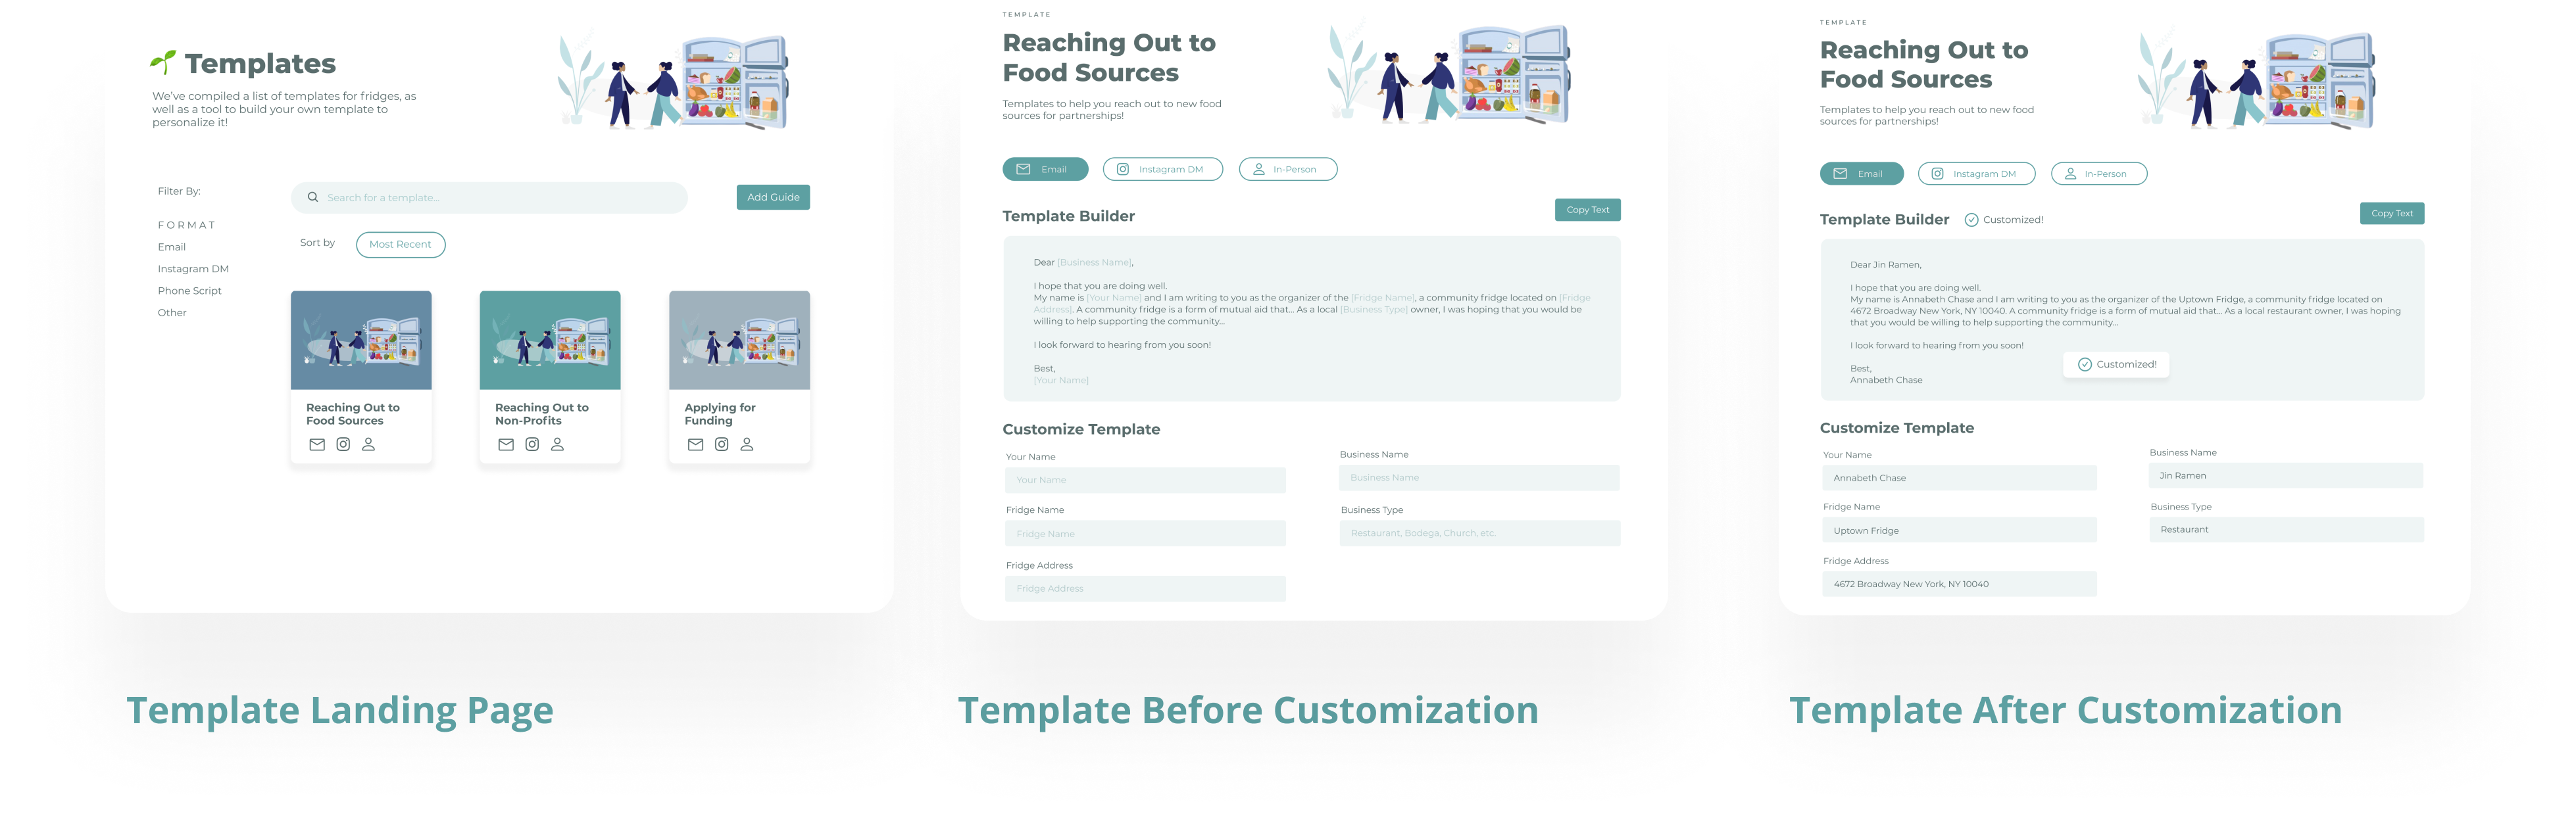 Three small images showing the template landing page where all templates are displayed, a customizable template before customization and after customization